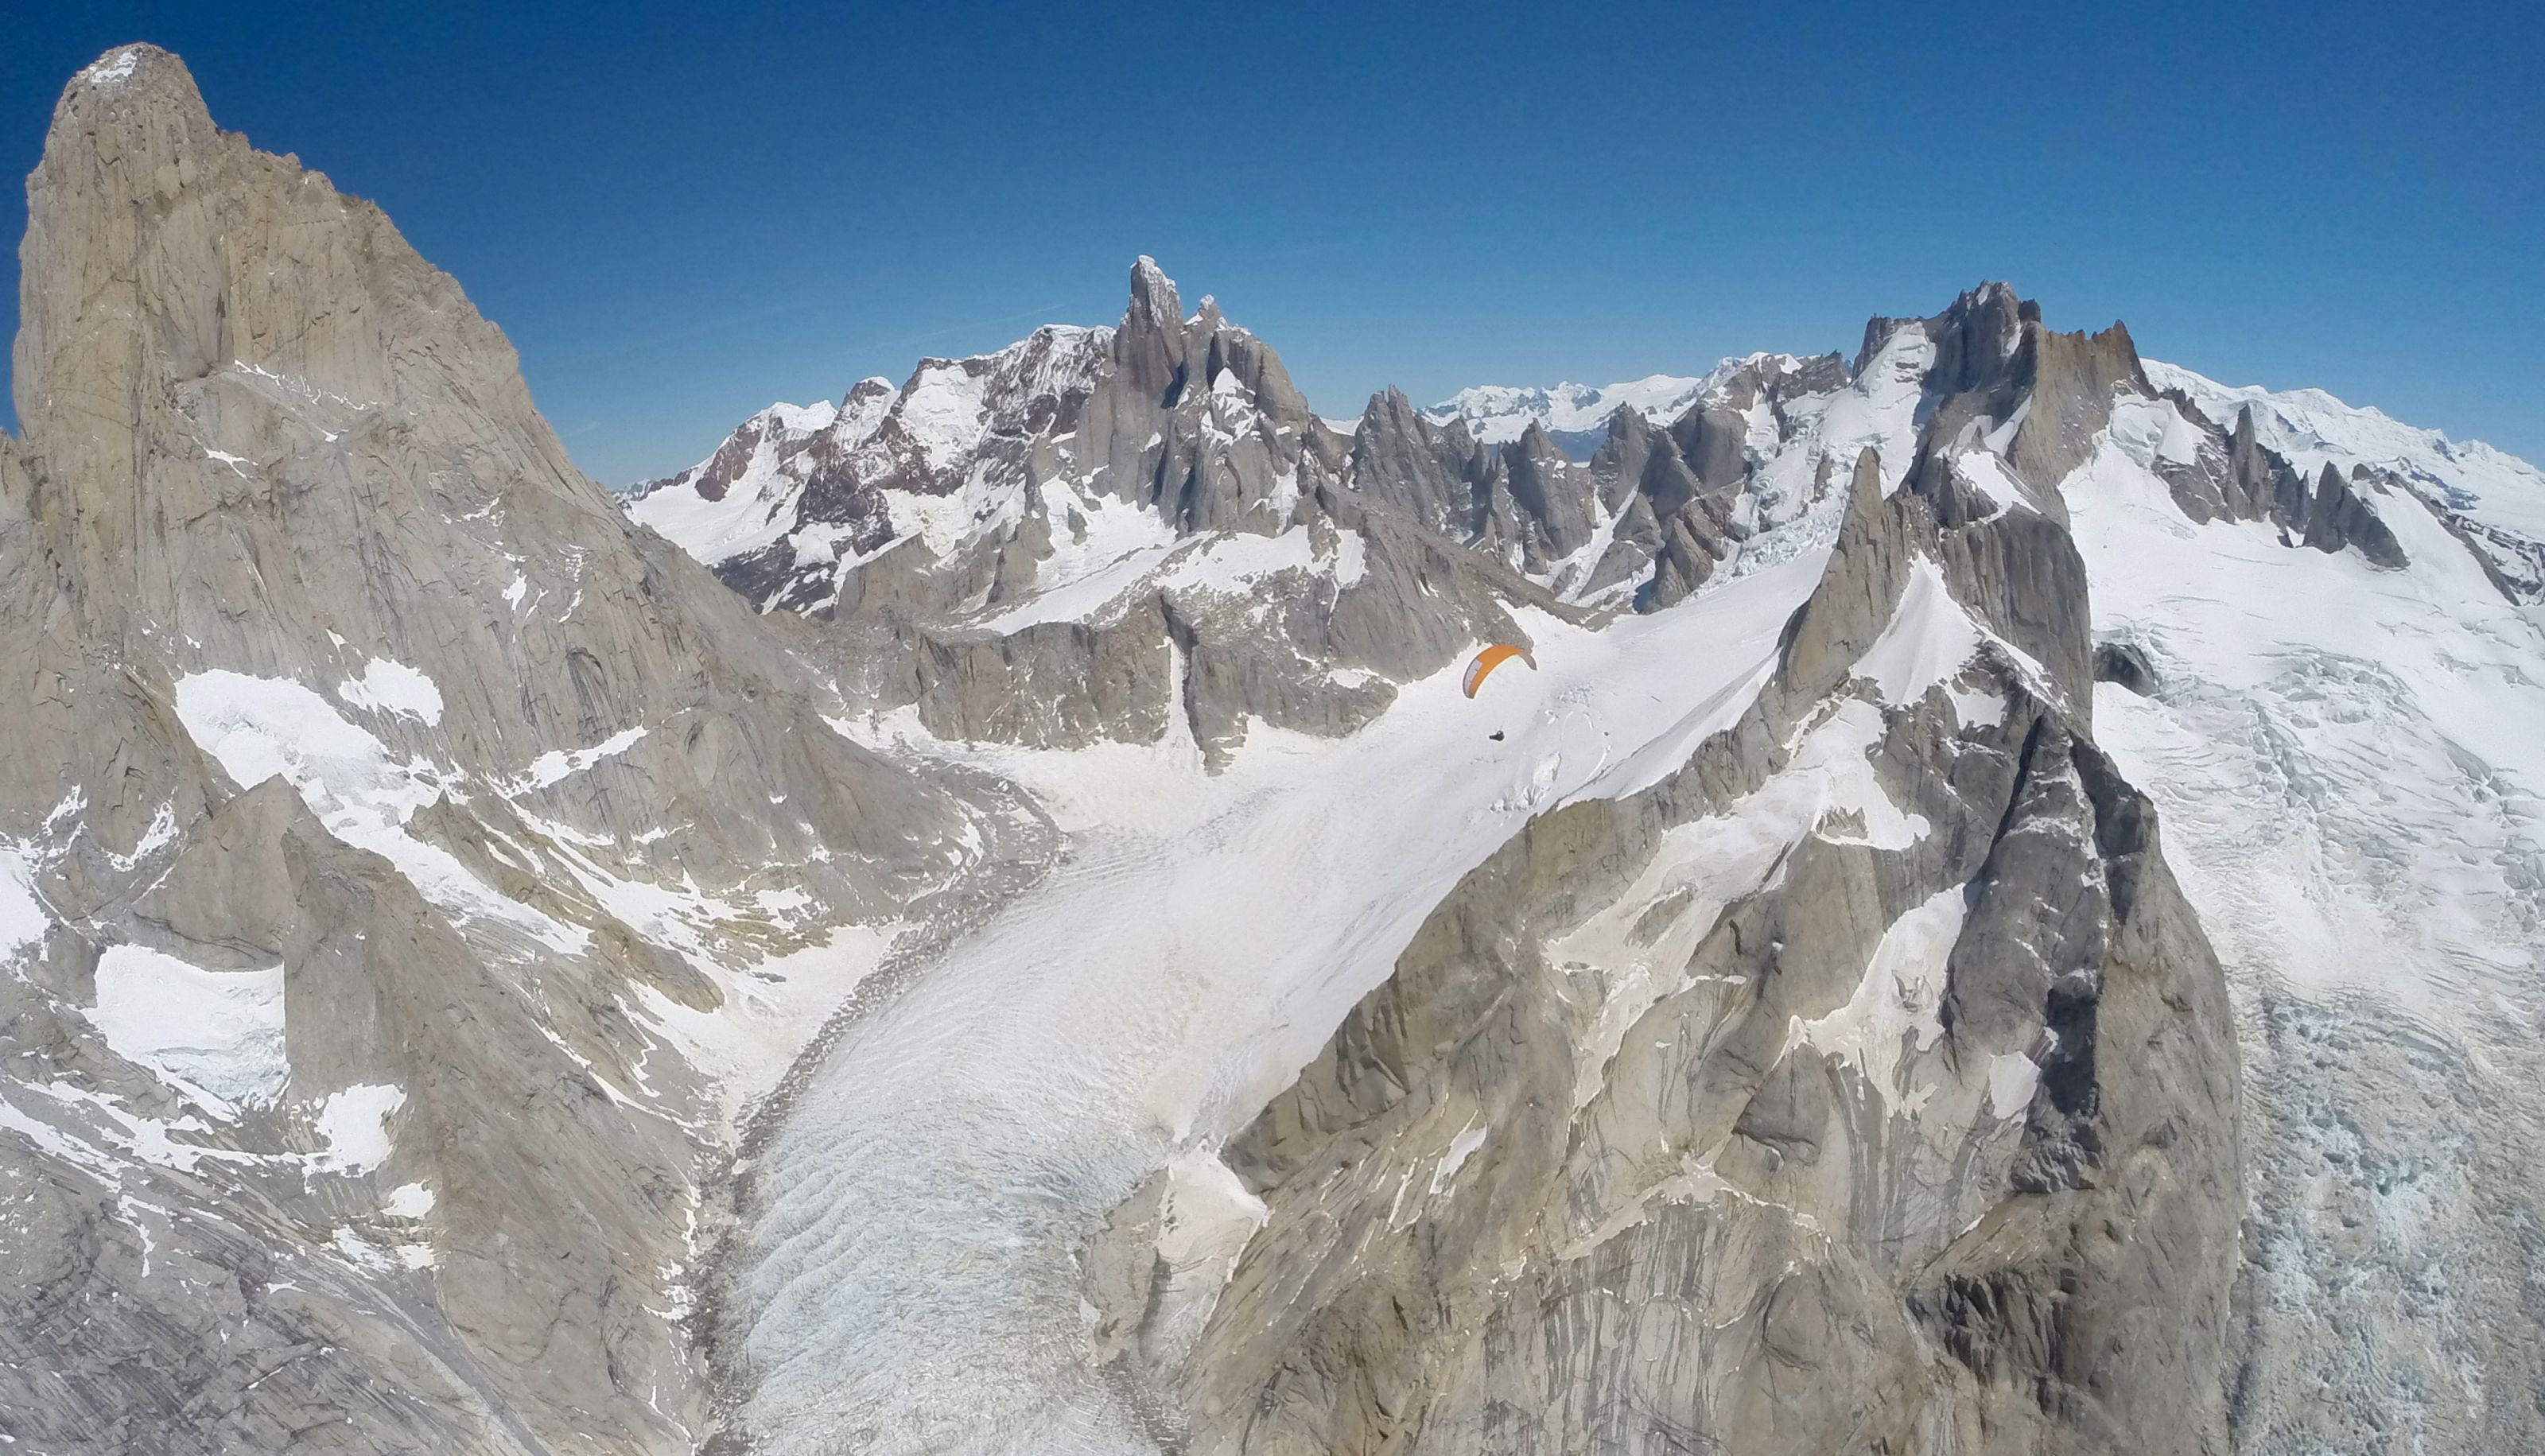 The Artik 5 makes the first ever paraglider traverse of Mount Fitz Roy